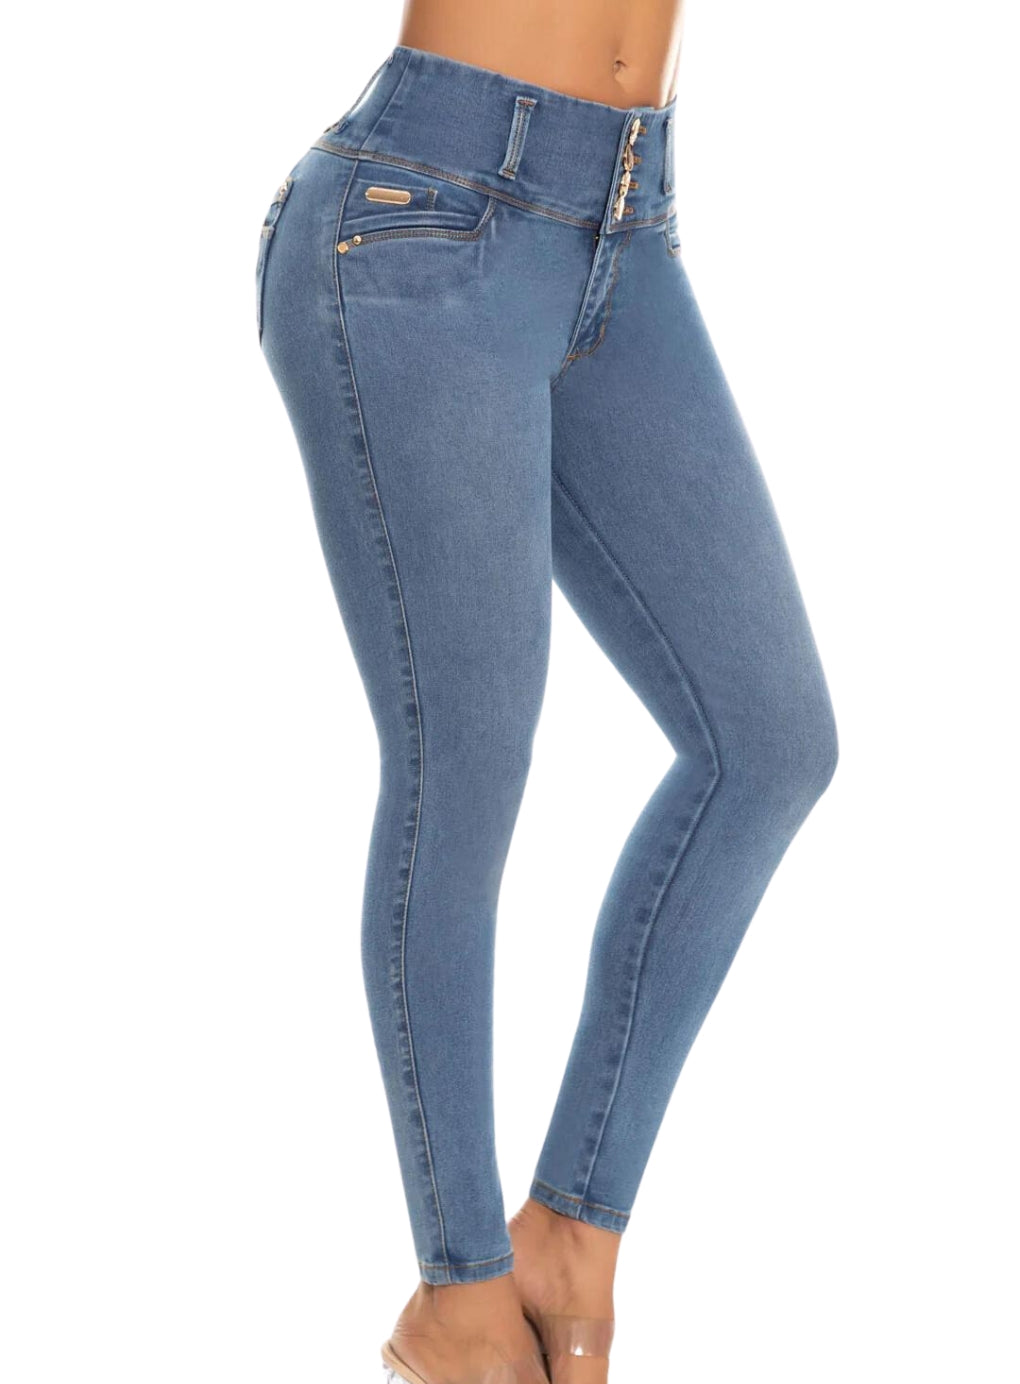 Women Colombian Butt Lifting Jeans Skinny Push Up Skinny High Rise Waist  Pants